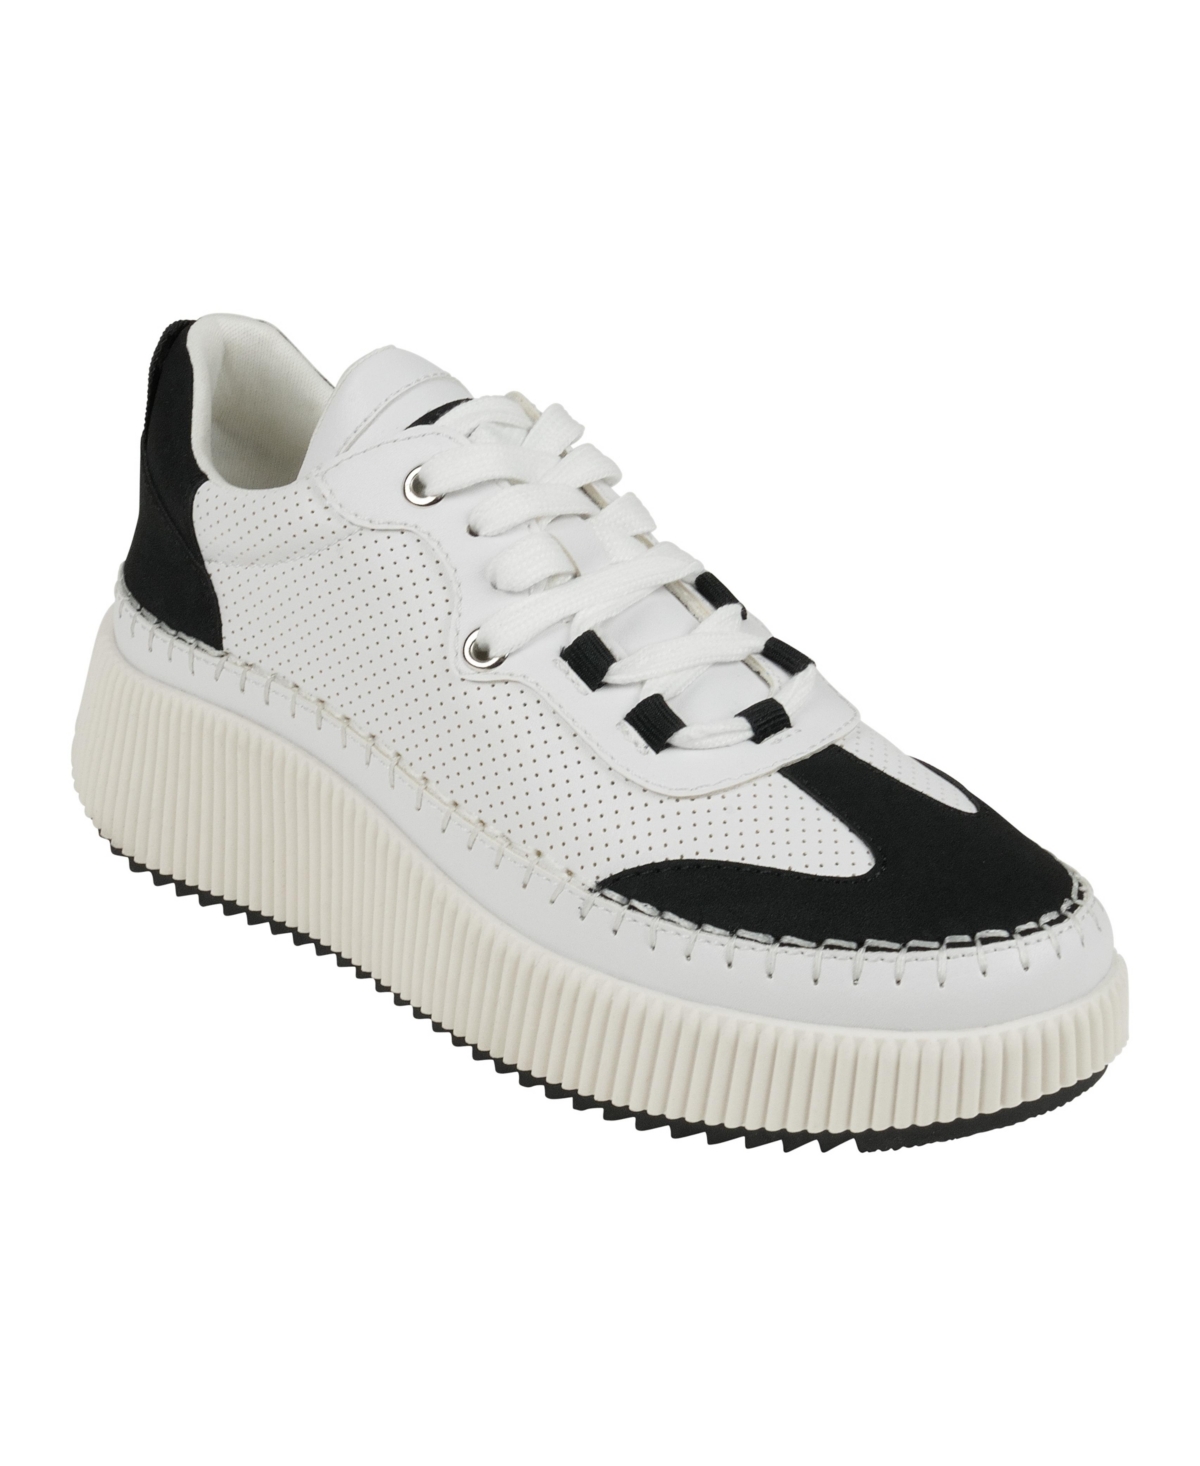 Women's Madrid Lace Up Sneakers - Black, White